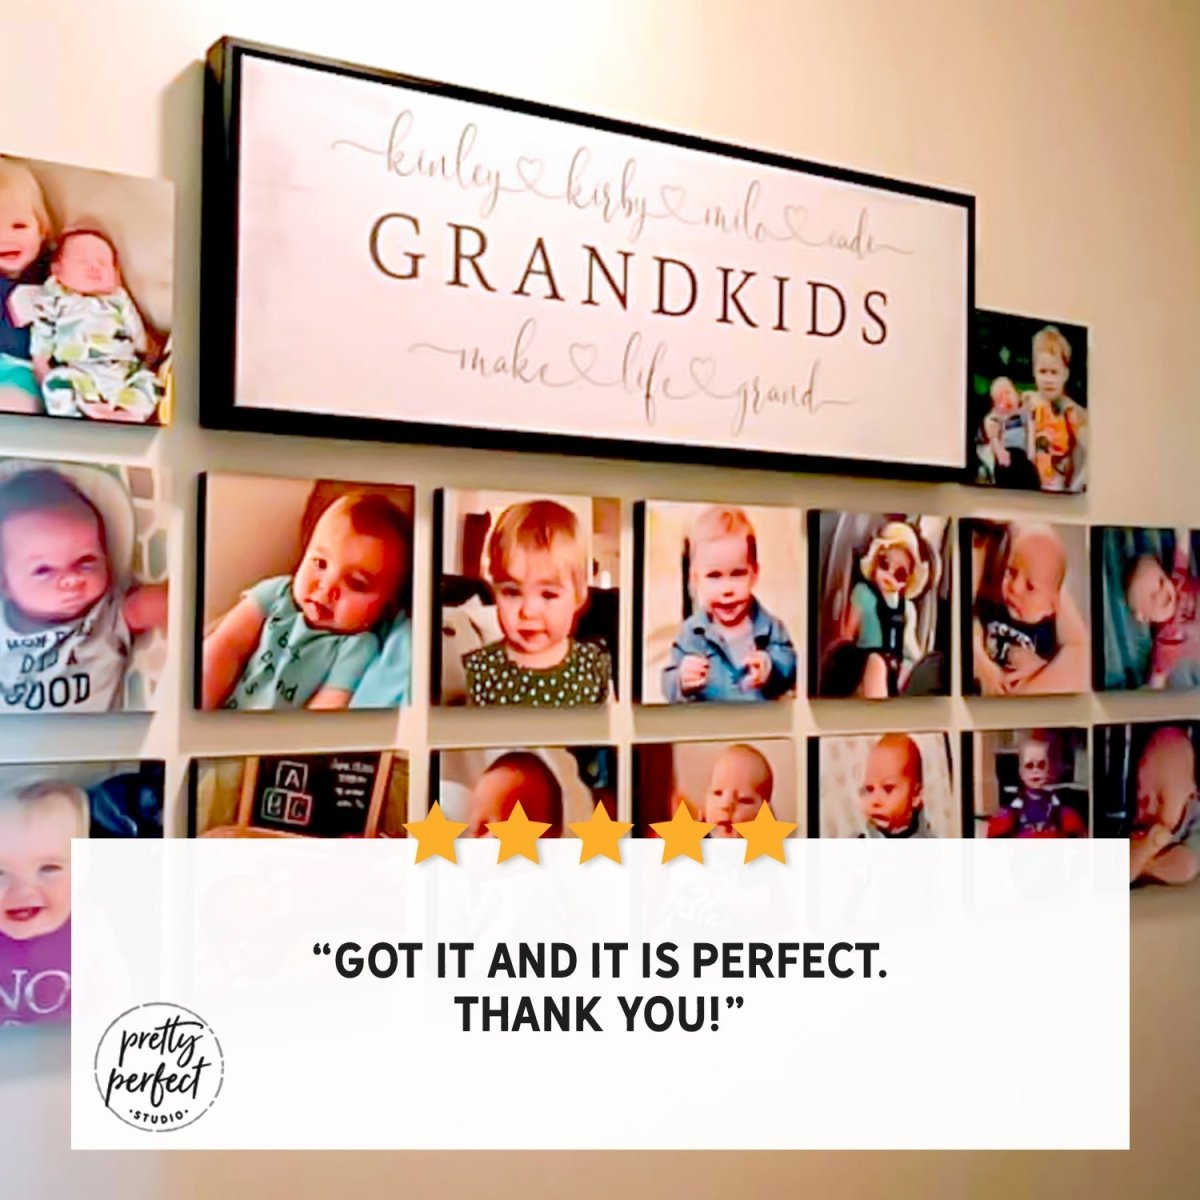 Customer product review for personalized grandkids make life grand sign by Pretty Perfect Studio